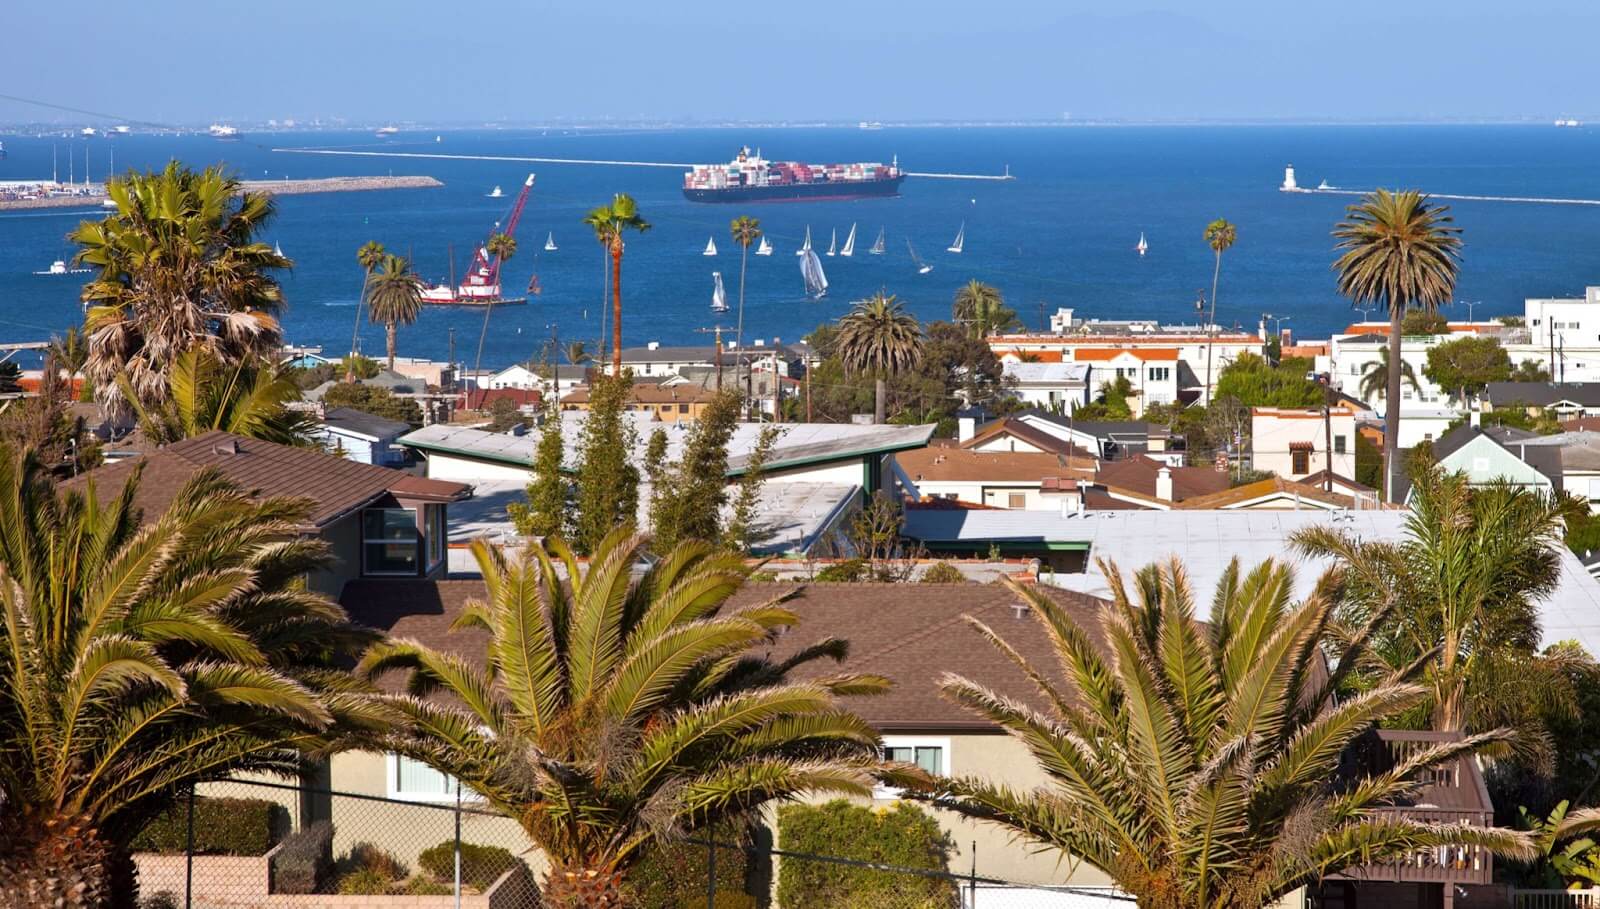 View of the Pacific Ocean in San Pedro, CA, with yachts and sailboats in the water.